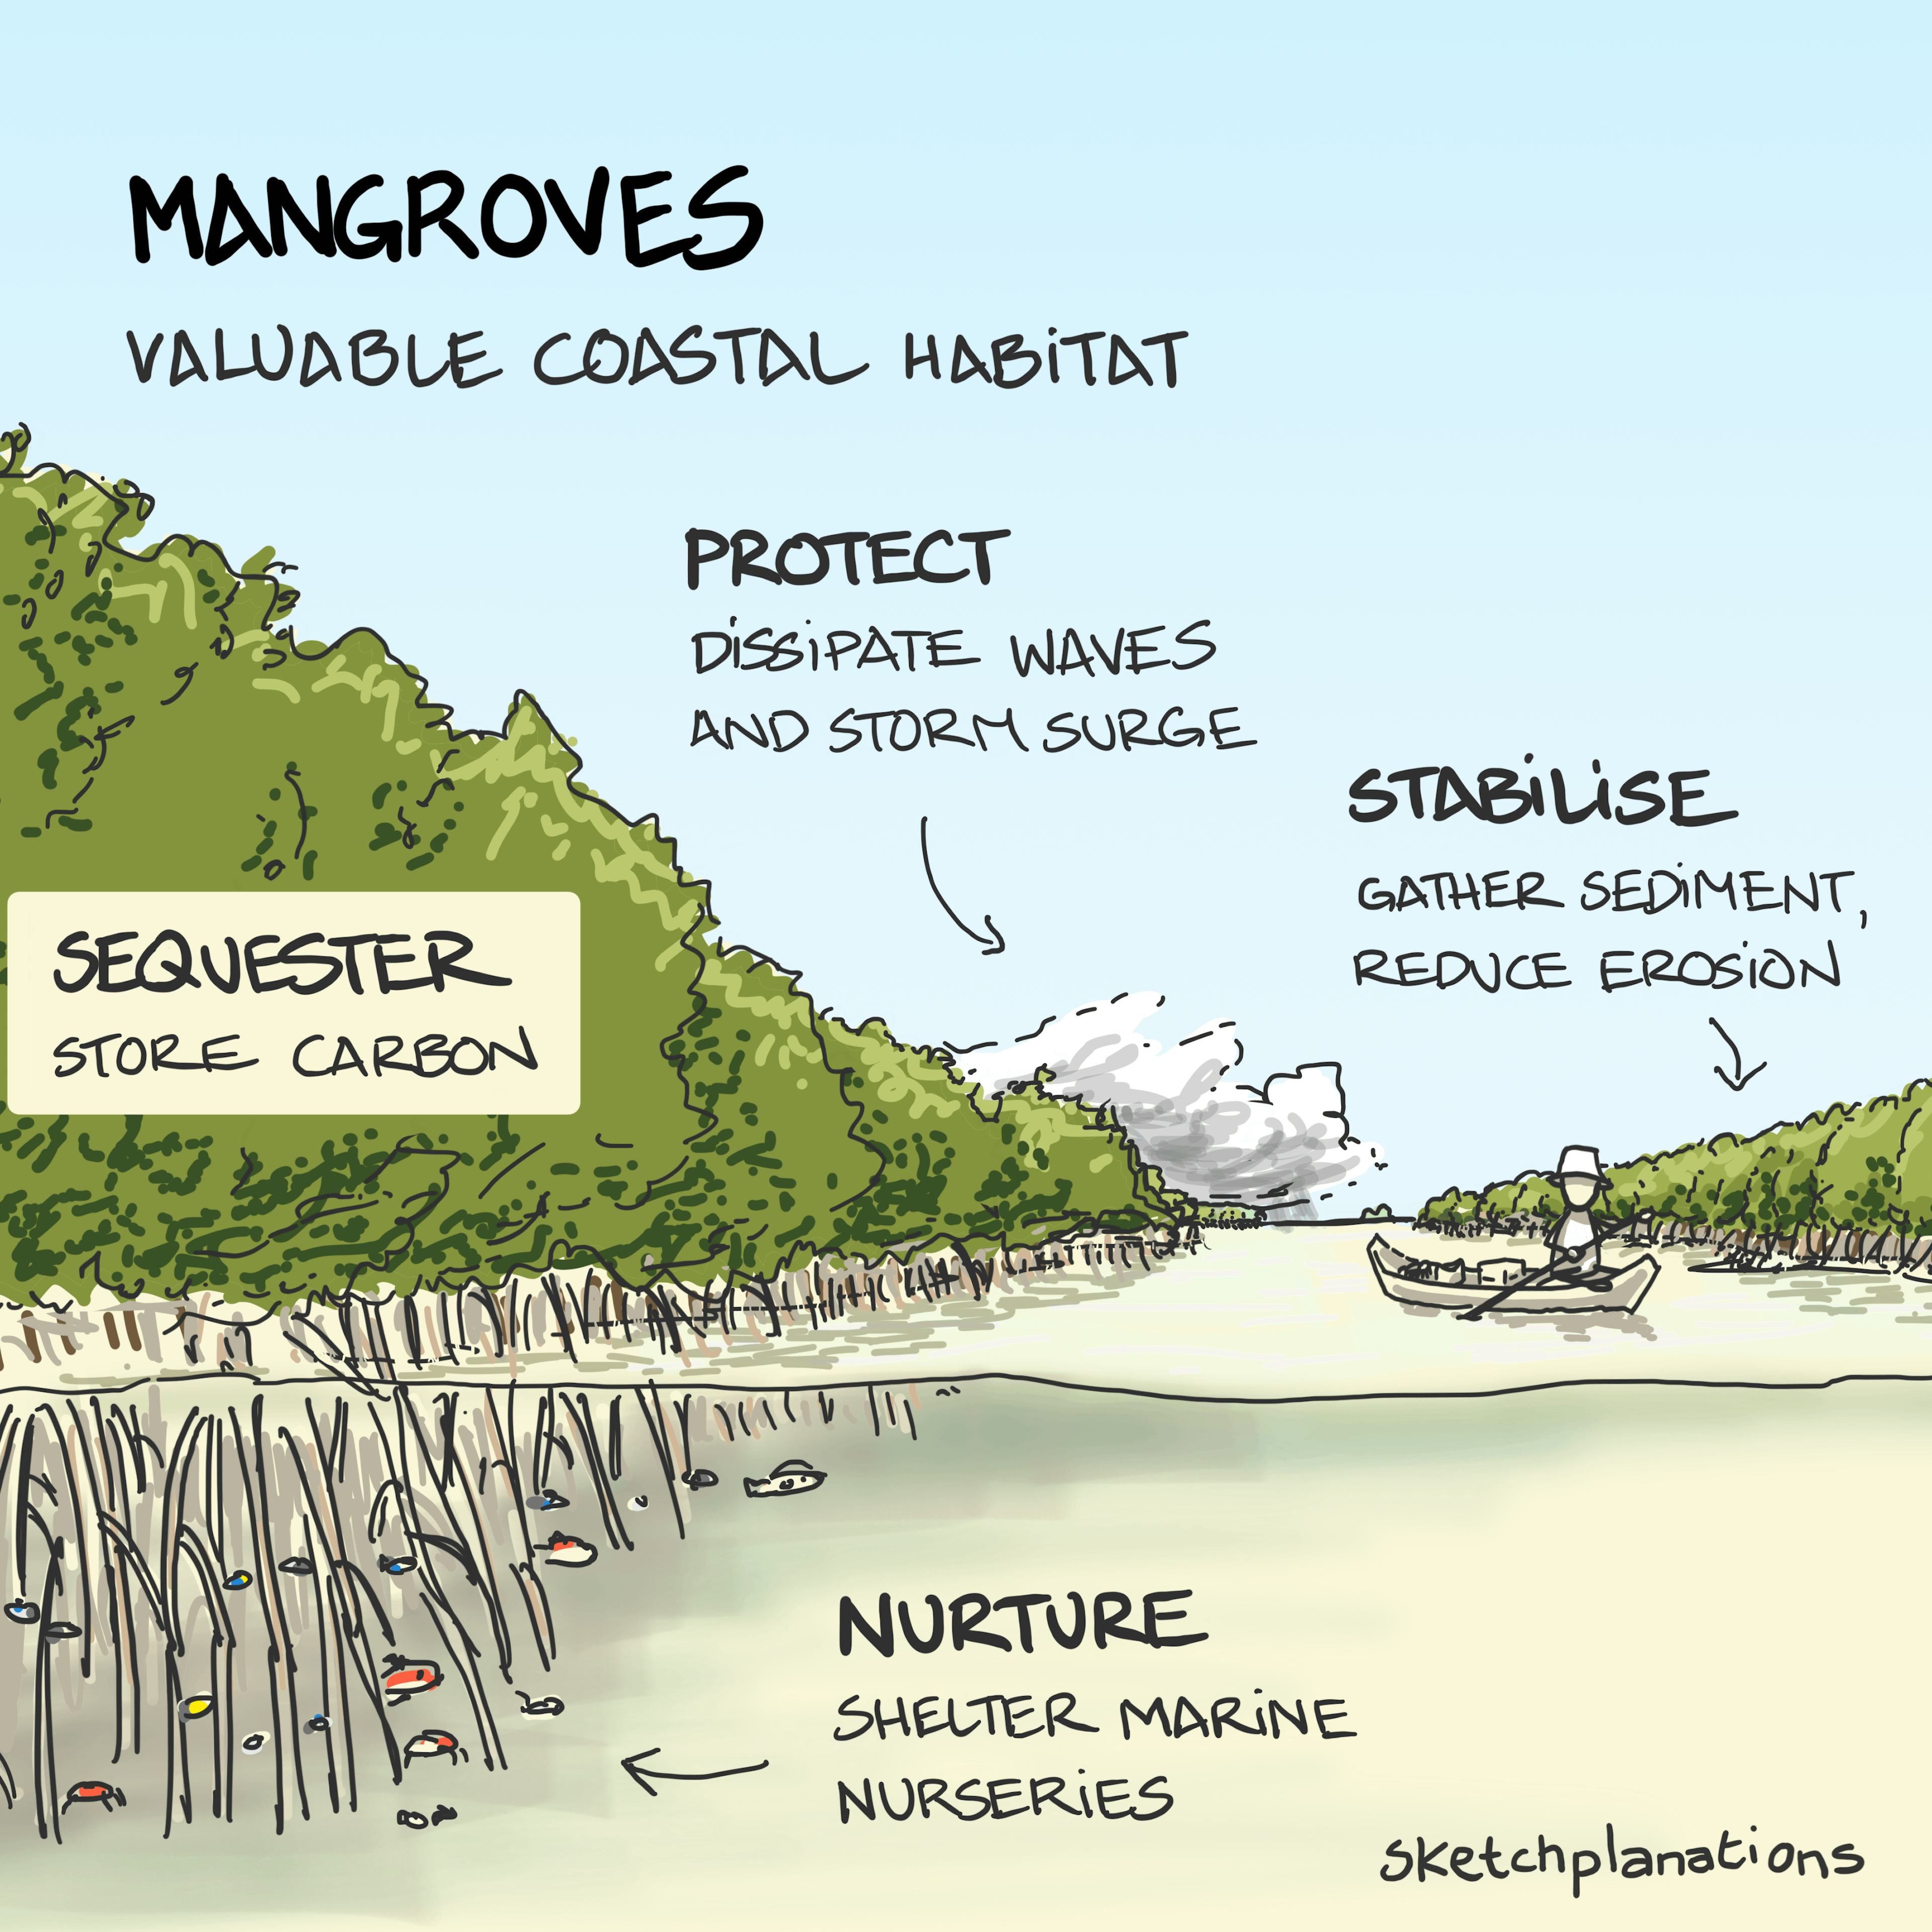 Mangroves illustration: showing the coastal habitat and their benefits in protecting, stabilising, nurturing and sequestering